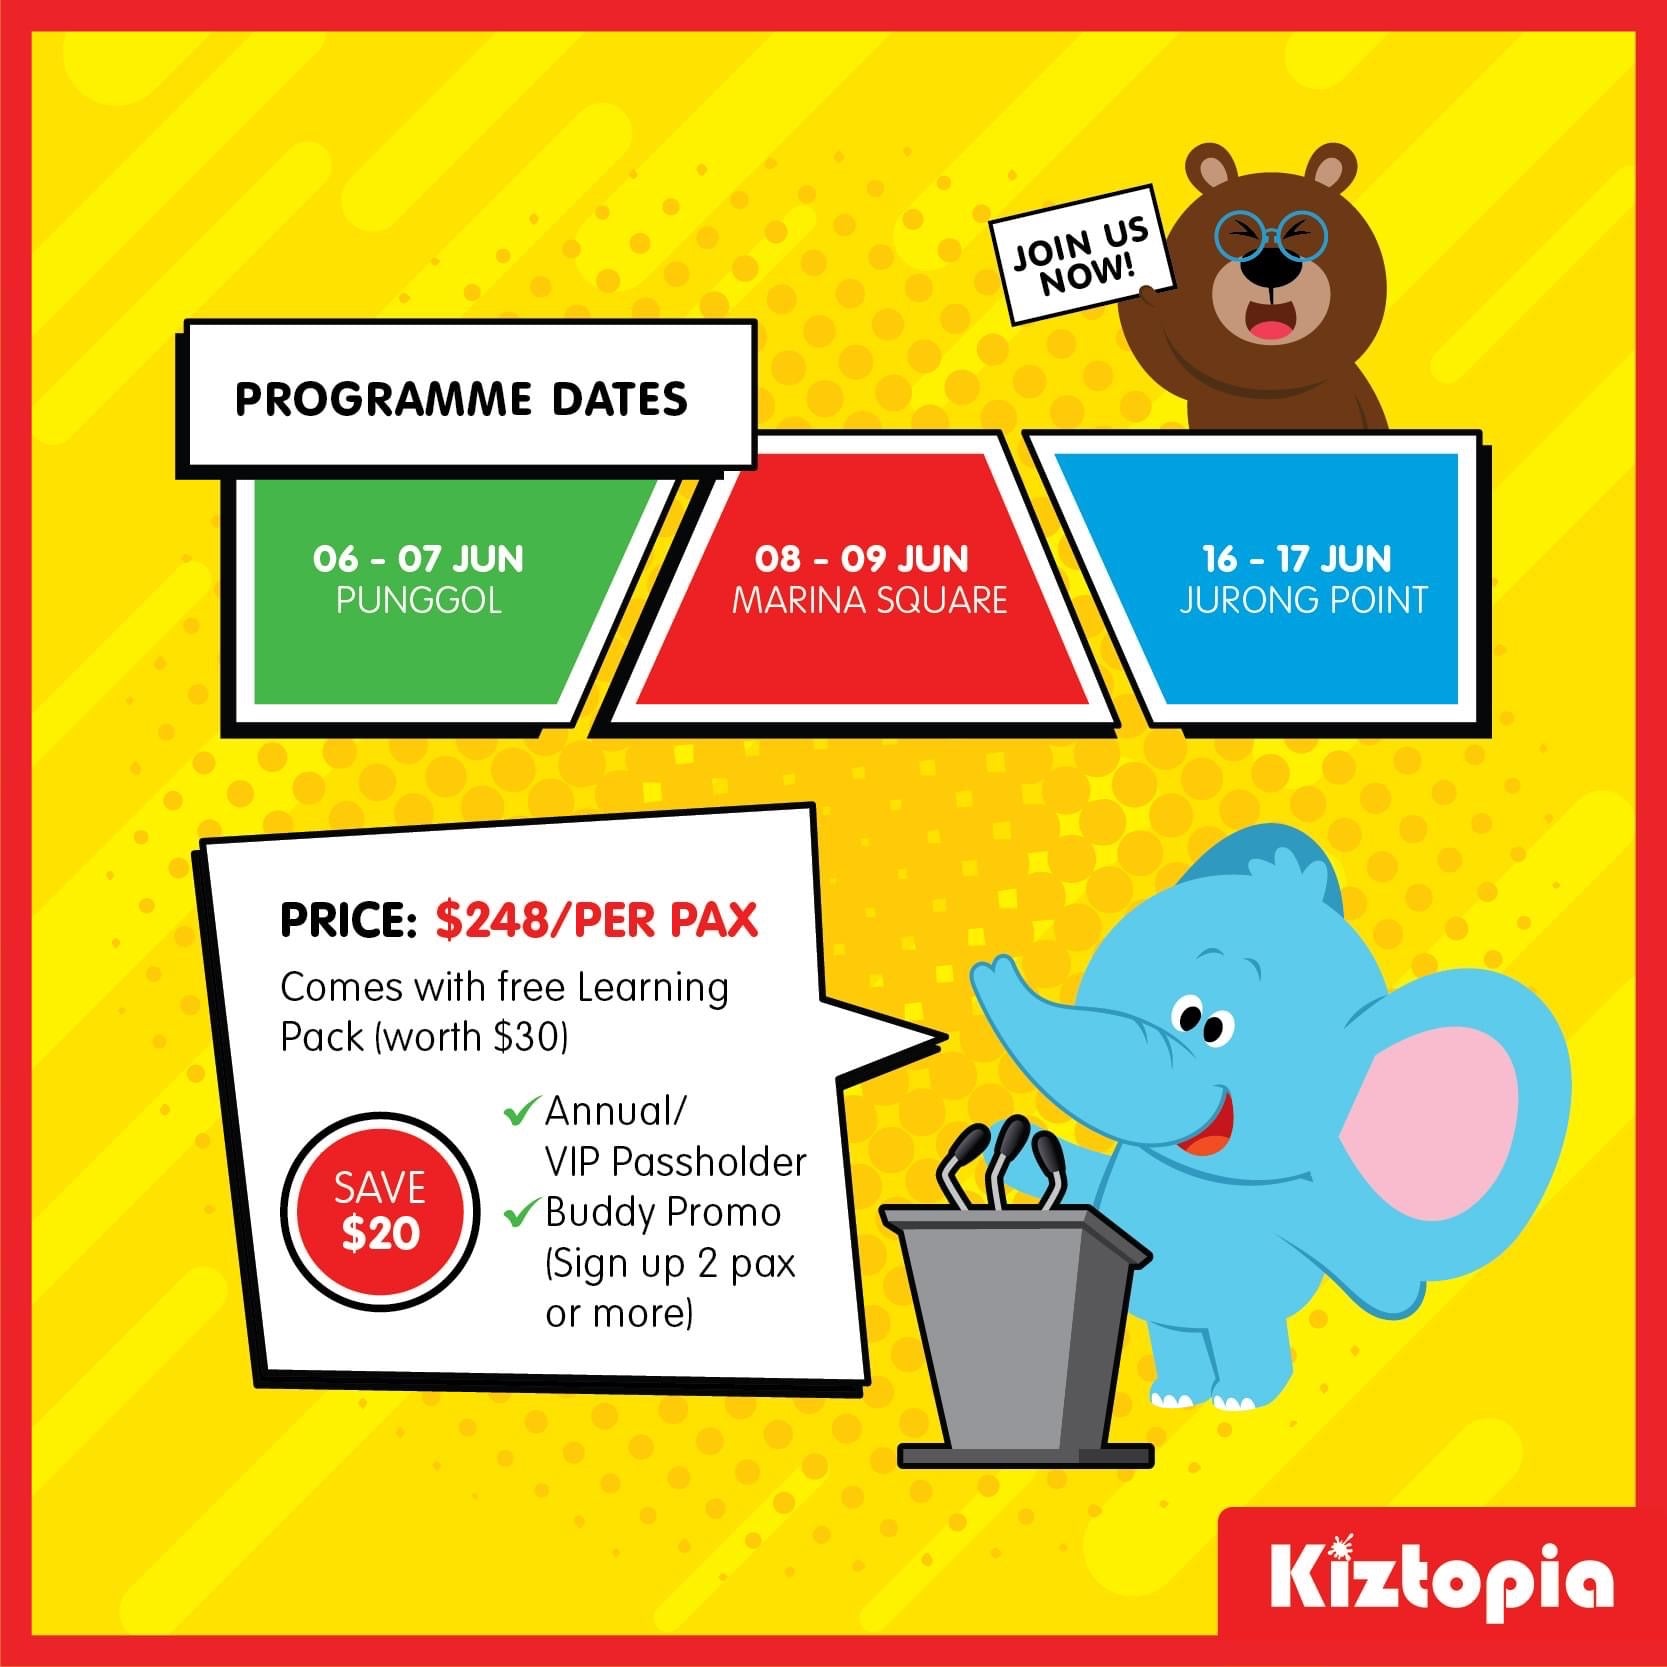 2-Day June Holiday Camp (4 Workshops) @ Kiztopia (4 - 7 years old)